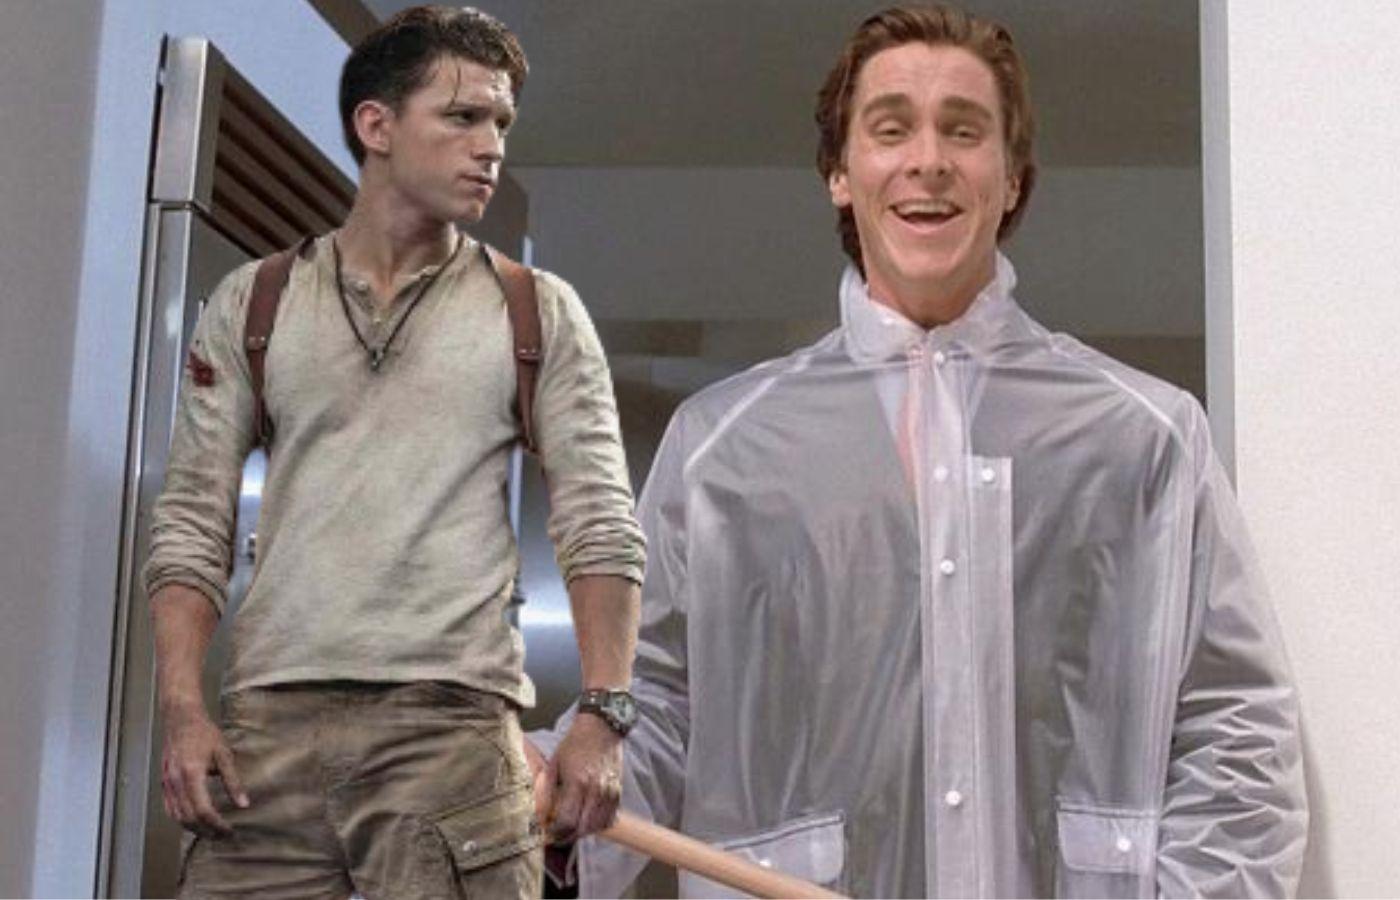 Tom Holland in Unchartered and Christian Bale in American Psycho